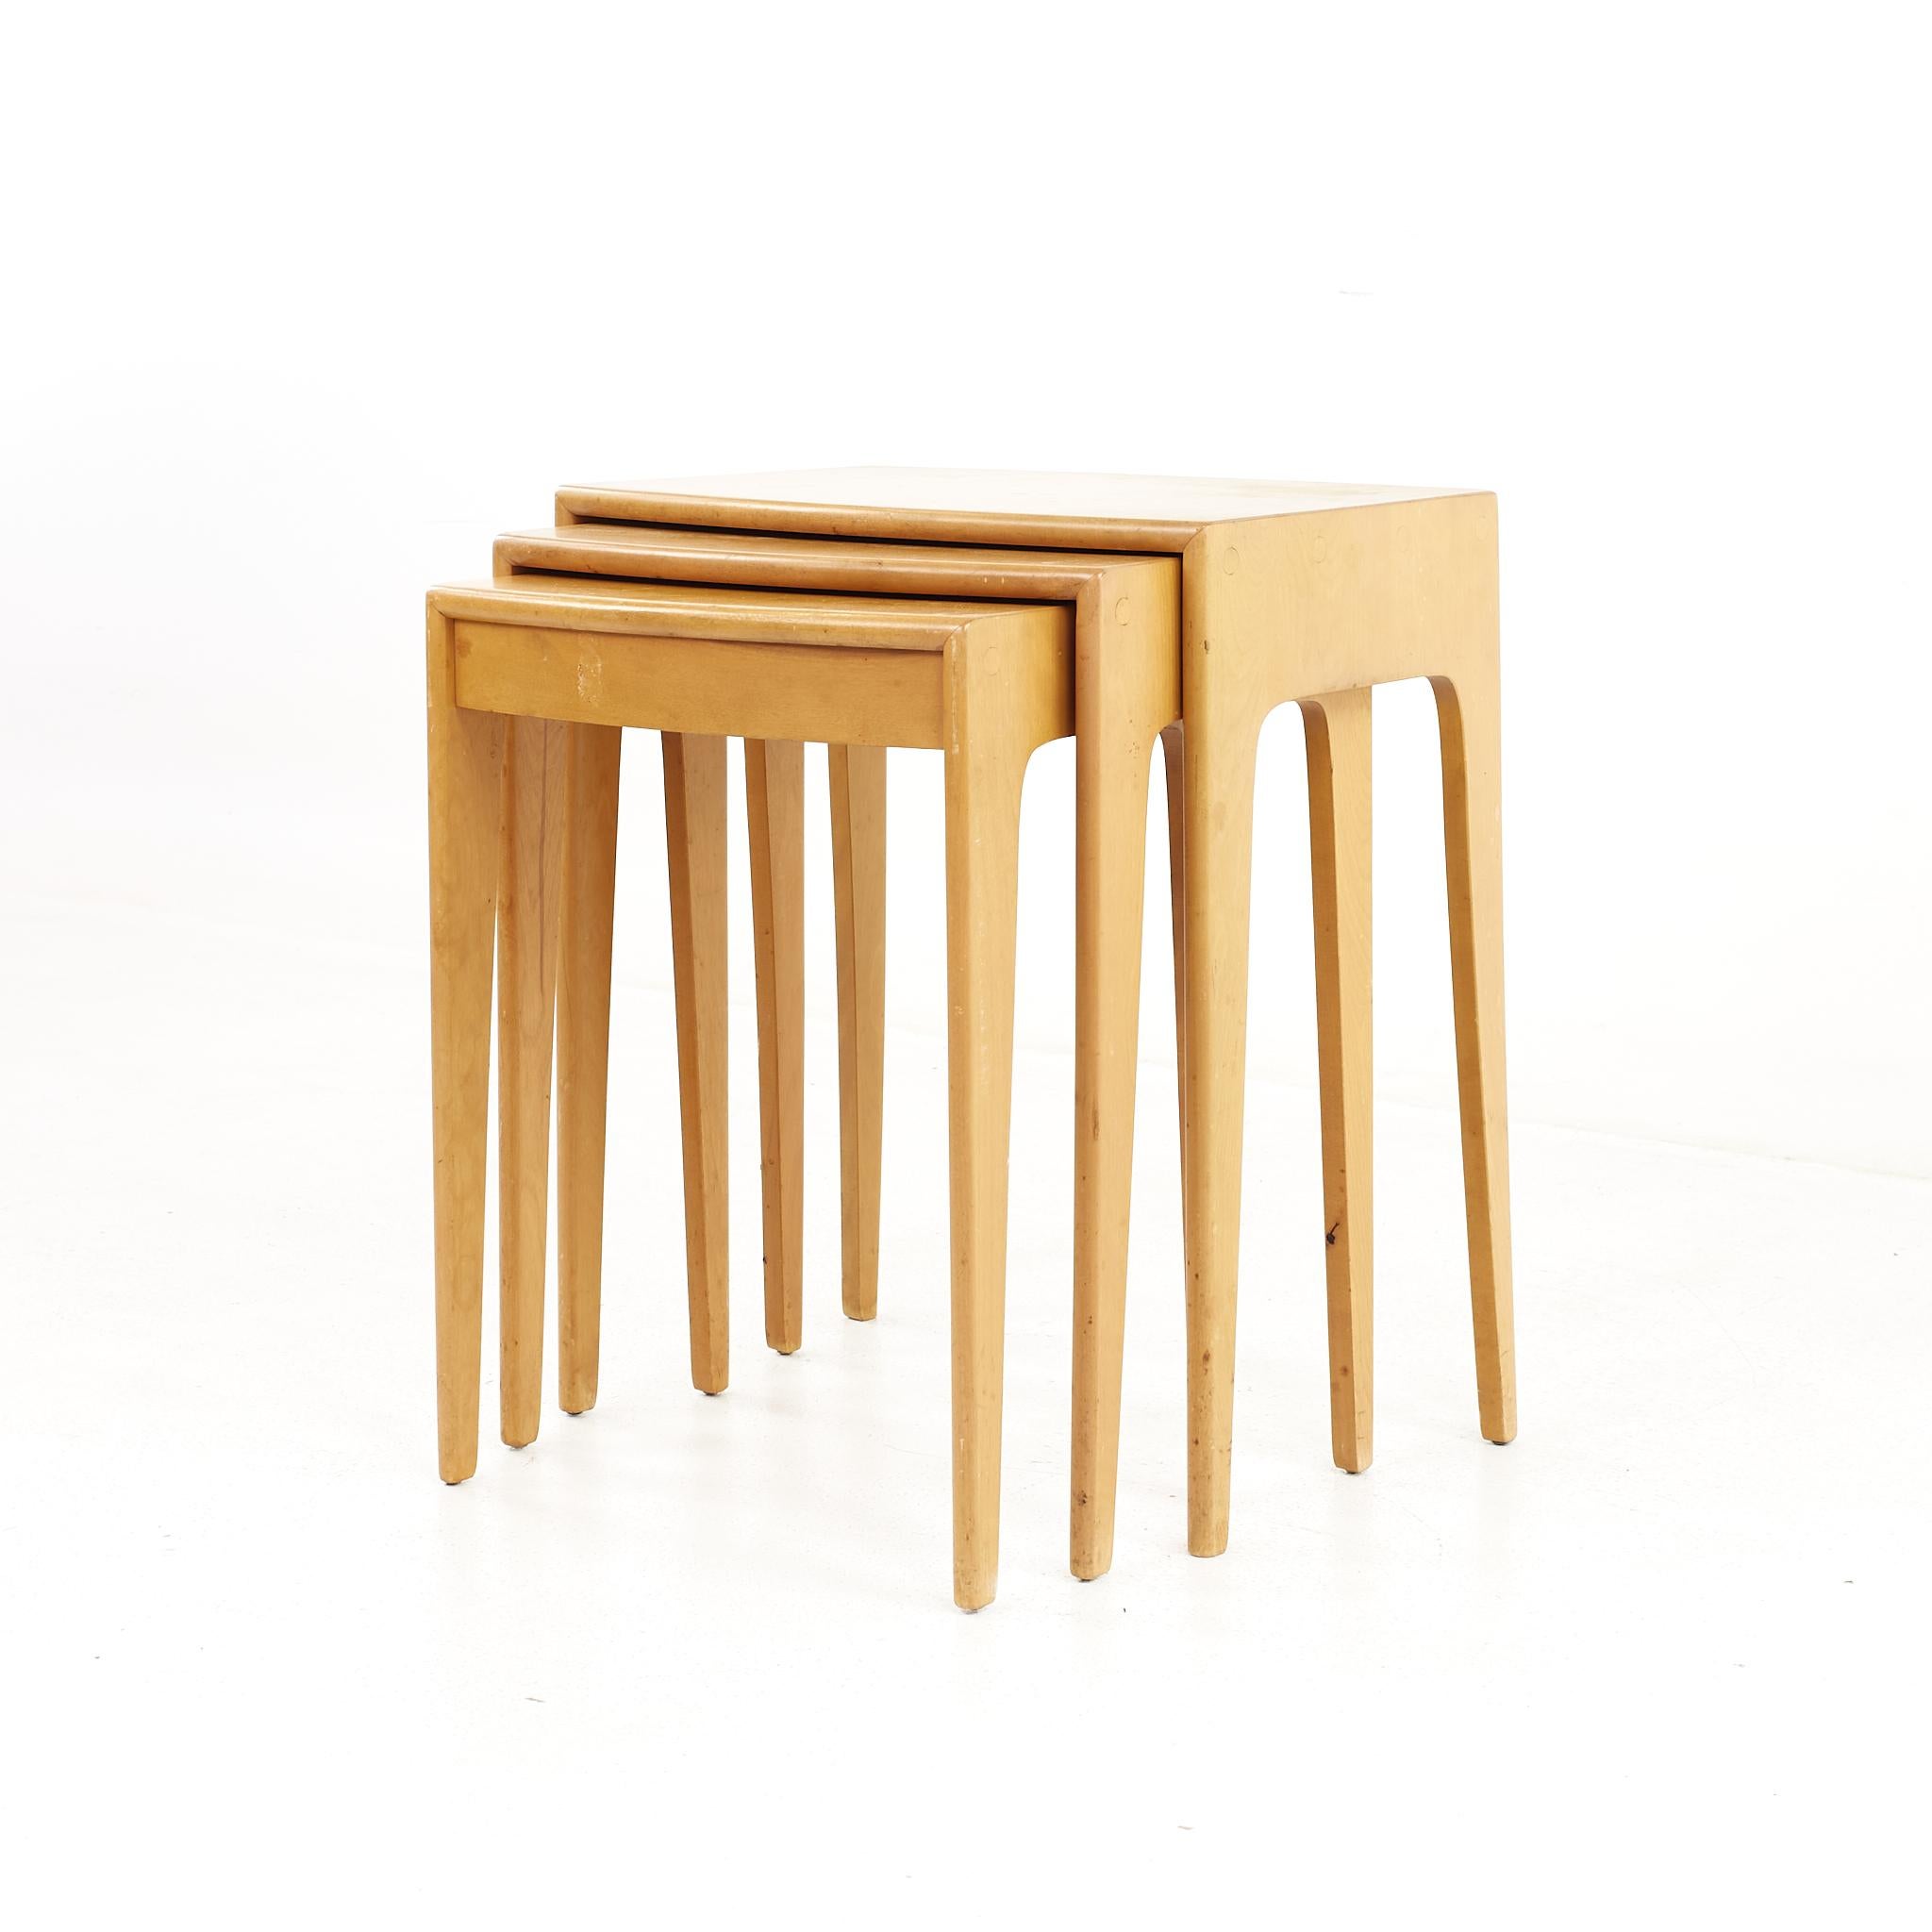 Late 20th Century Heywood Wakefield Mid Century Maple Wheat Nesting Tables - Set of 3 For Sale